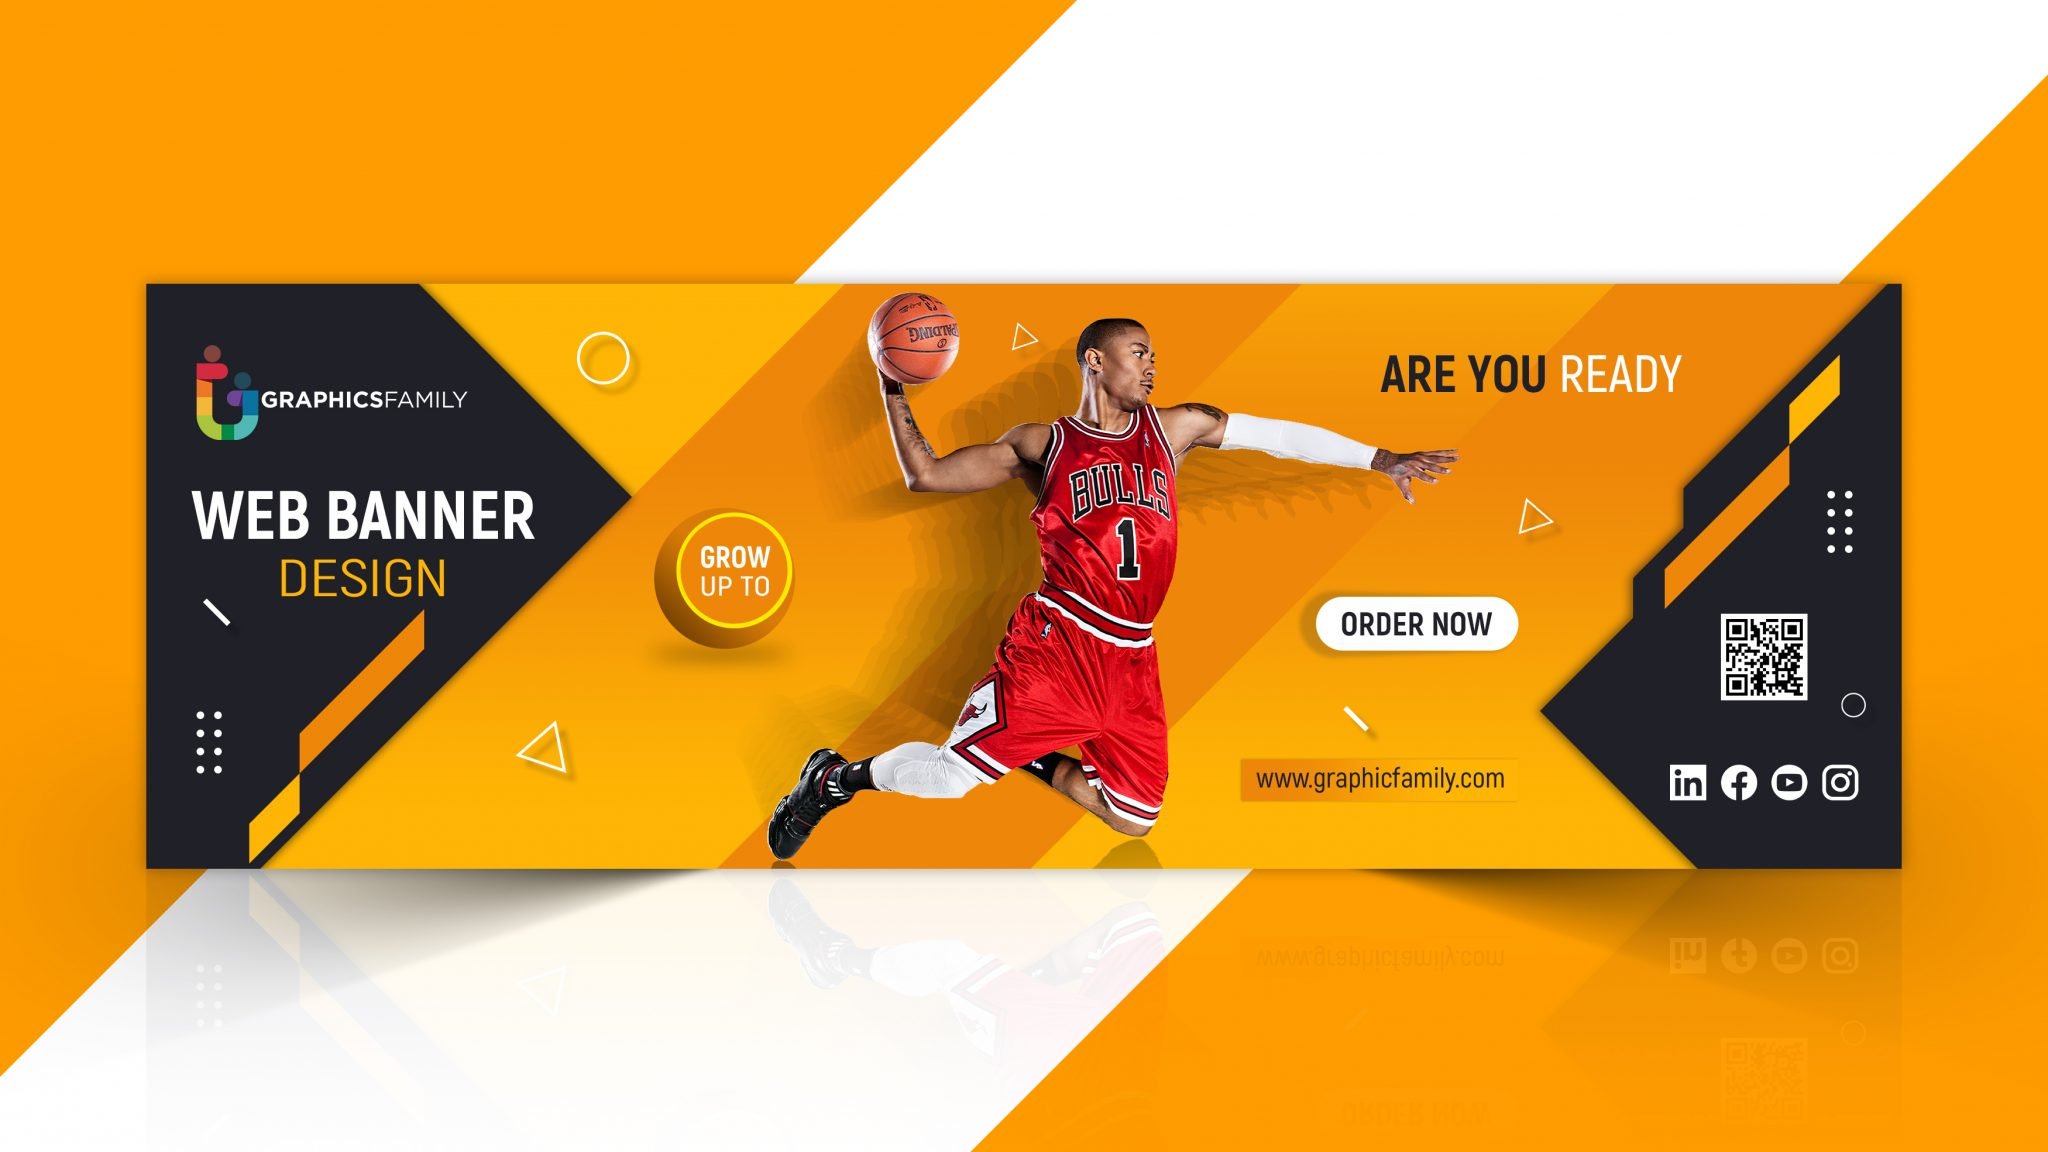 Web banner template with sports concept GraphicsFamily